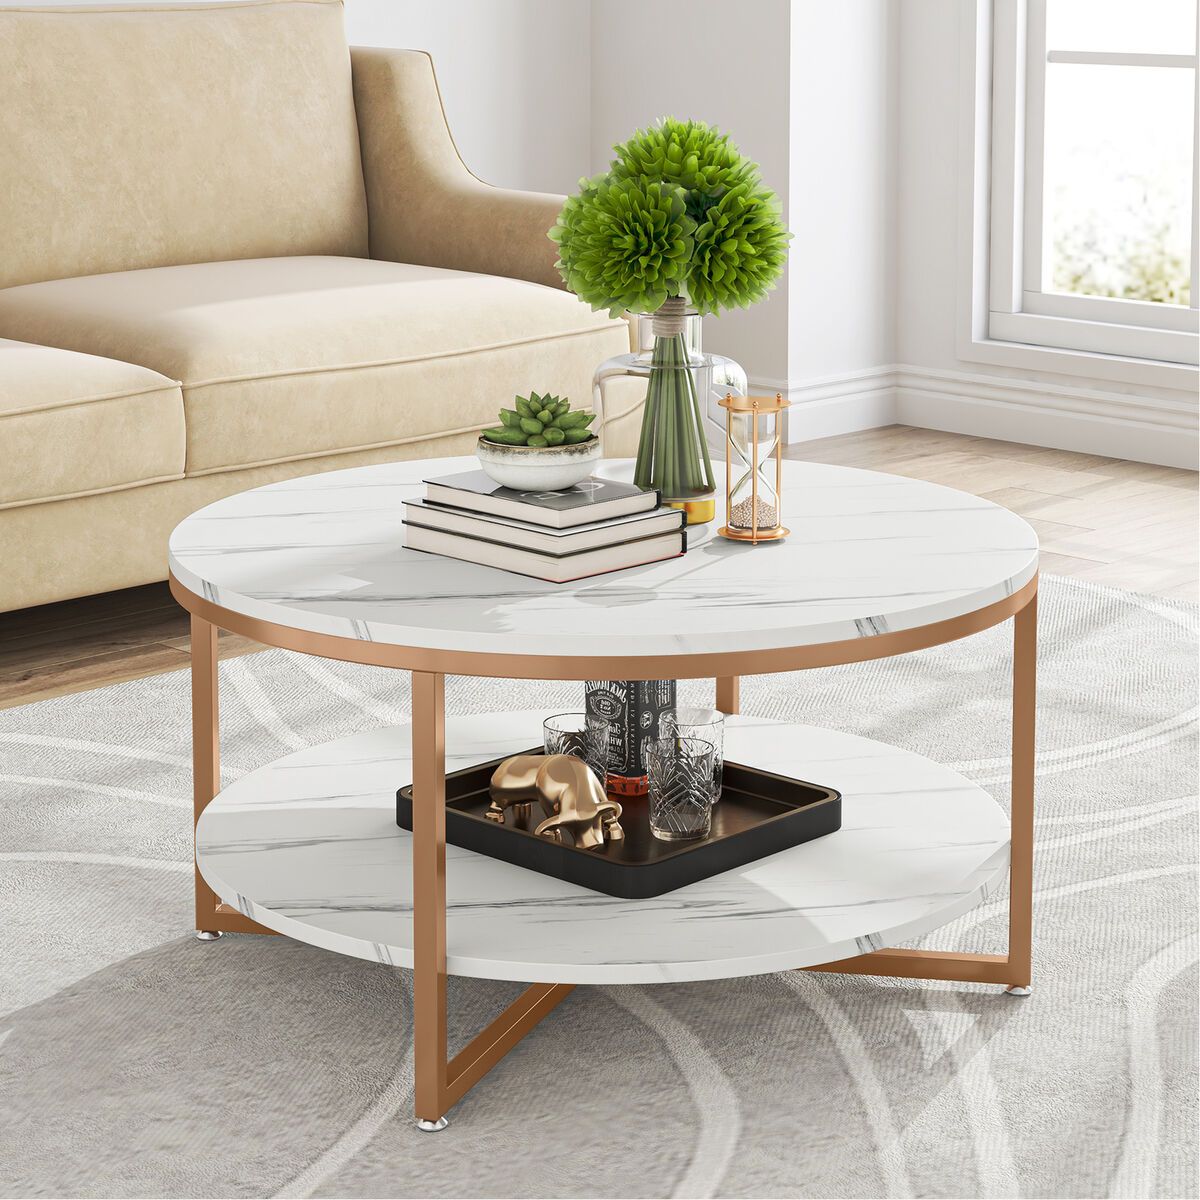 2 Tier Round Coffee Table With Storage, Modern Faux Marble Wood Coffee Table  | Ebay Intended For Modern Round Faux Marble Coffee Tables (View 3 of 15)